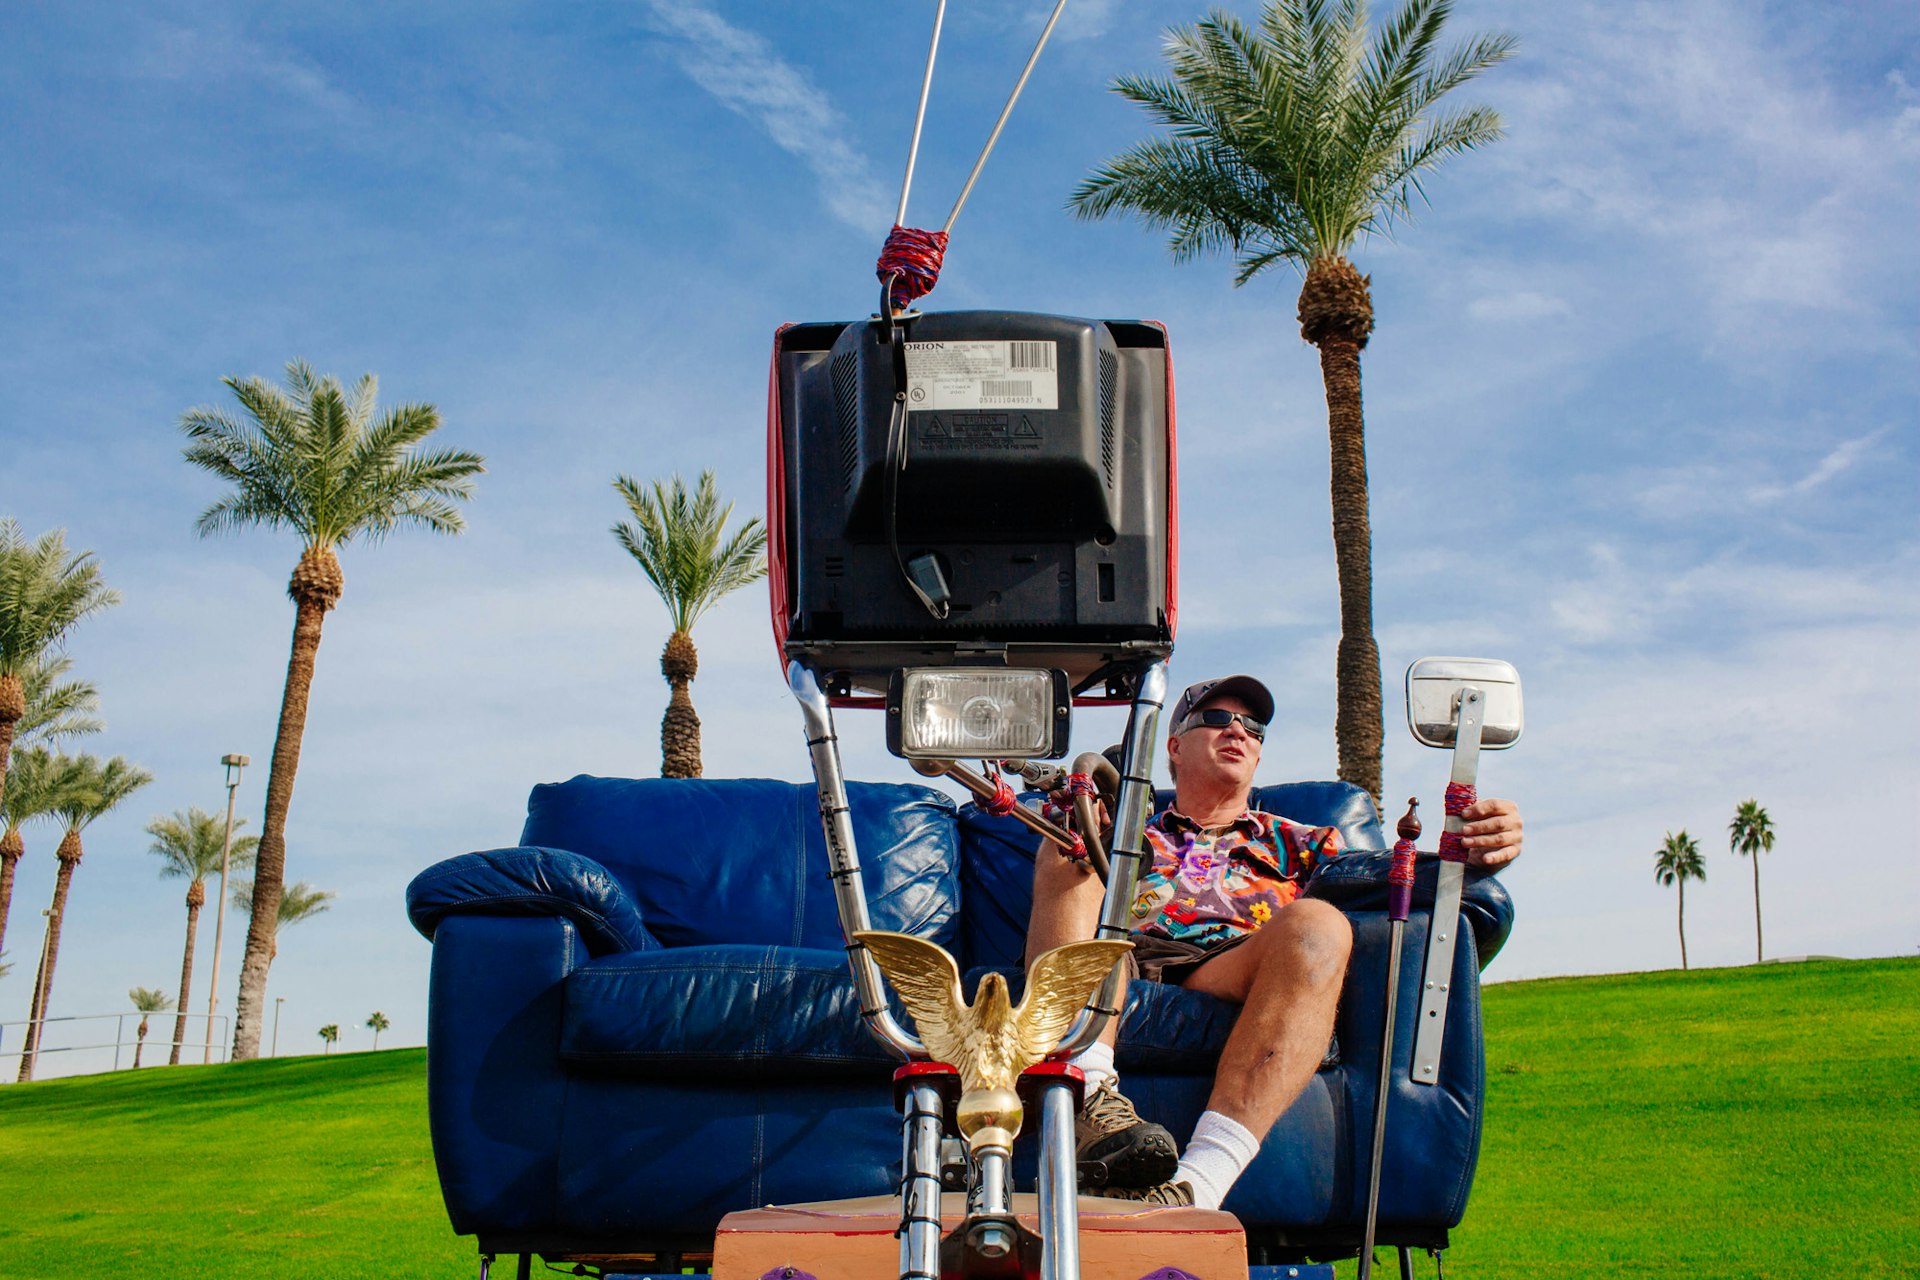 Jerry Zwack, 62, created a motorized couch that he now drives around Sun City because his wife jokingly called him a "couch potato" who needed to get out of the house. He said his odometer now reads more than 3,000 miles. He poses with his one-of-a-kind transportation outside of the Sun Bowl Amphitheater in Sun City, Arizona December 1, 2013.